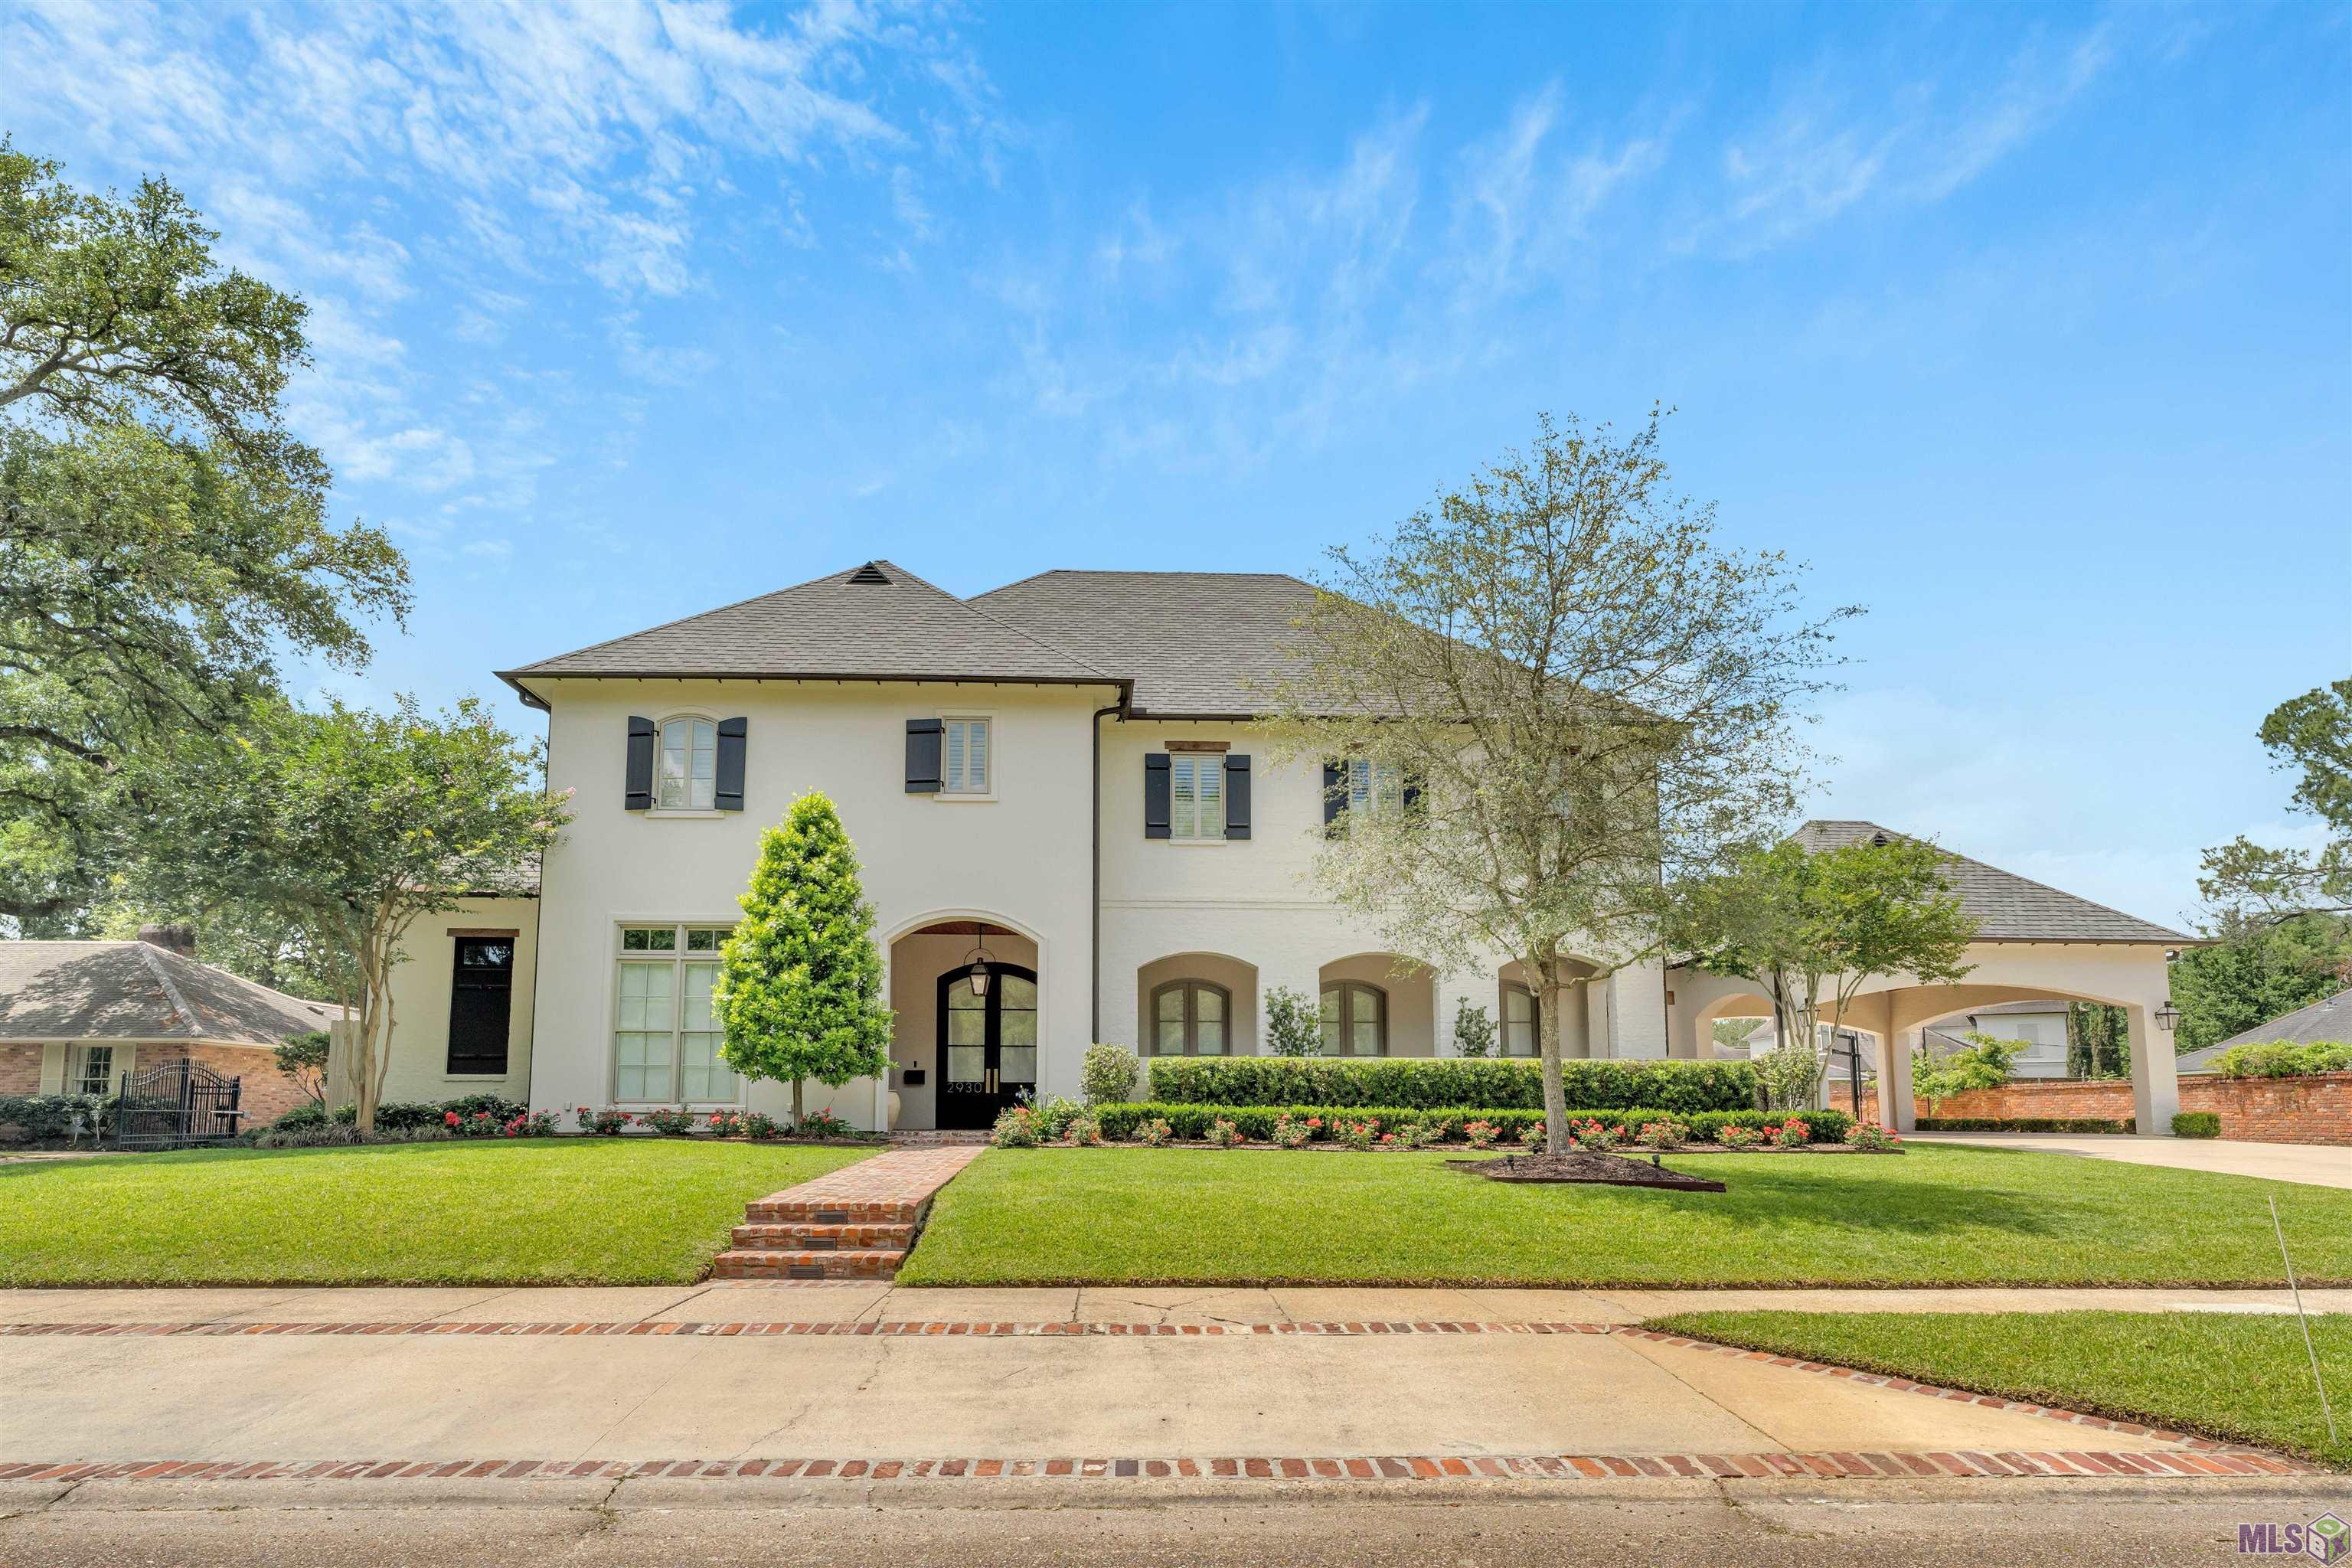 This beautiful home in Jefferson Place/Bocage Subdivision consists of 6 bedrooms/5.5 baths, with an additional 2,815 sf of outdoor covered space. The front showcases arches with an oversized breezeway/courtyard with seating area. The contemporary home as you enter shows the open modern floorplan into the living, kitchen and breakfast area. The spacious kitchen highlights SubZero appliances, 60" French range, wine/coffee bar space, custom cabinetry, marble countertops, and brass/copper/lucite hardware throughout. The main floor provides an add'l bedroom for guests and a stylish bathroom/shower. This home features a formal dining room/pool table/game area, and a formal office space that has access from the primary bedroom. The primary closet also provides a desk workspace/vanity area, located alongside the primary bathroom. As you enter the upstairs level, it features a media room and 3 roomy bedrooms with 2 baths surrounding a children's entertainment/bunk area for added privacy.  The spacious outdoor living area has retractable remote shades and a double-sided Isokern fireplace. The outdoor kitchen offers a Lynx grill/griddle top, commercial vent hood, an under-counter refrigerator, and a large island/sink-prep area. The oversized backyard has a 50' pool with a tanning ledge, deck jets, bubblers, remote LED lighting, and an open green space for kids. This well-thought-out home also contains an air-conditioned fitness room overlooking the pool, with pool bath nearby. The add'l private living area provides another bedroom and bathroom allowing for a multi-use space, which can be curated as a guest quarters for family/friends, gameroom/entertainment area, or a yoga room. Added features include a surround sound system inside and outside the home, a porte-cochere that spaciously accommodates two vehicles and side parking, a two-car garage, and a 1/2 basketball court, with add'l parking spaces in front, and a 40 KW Katolight commercial generator for uninterrupted power.